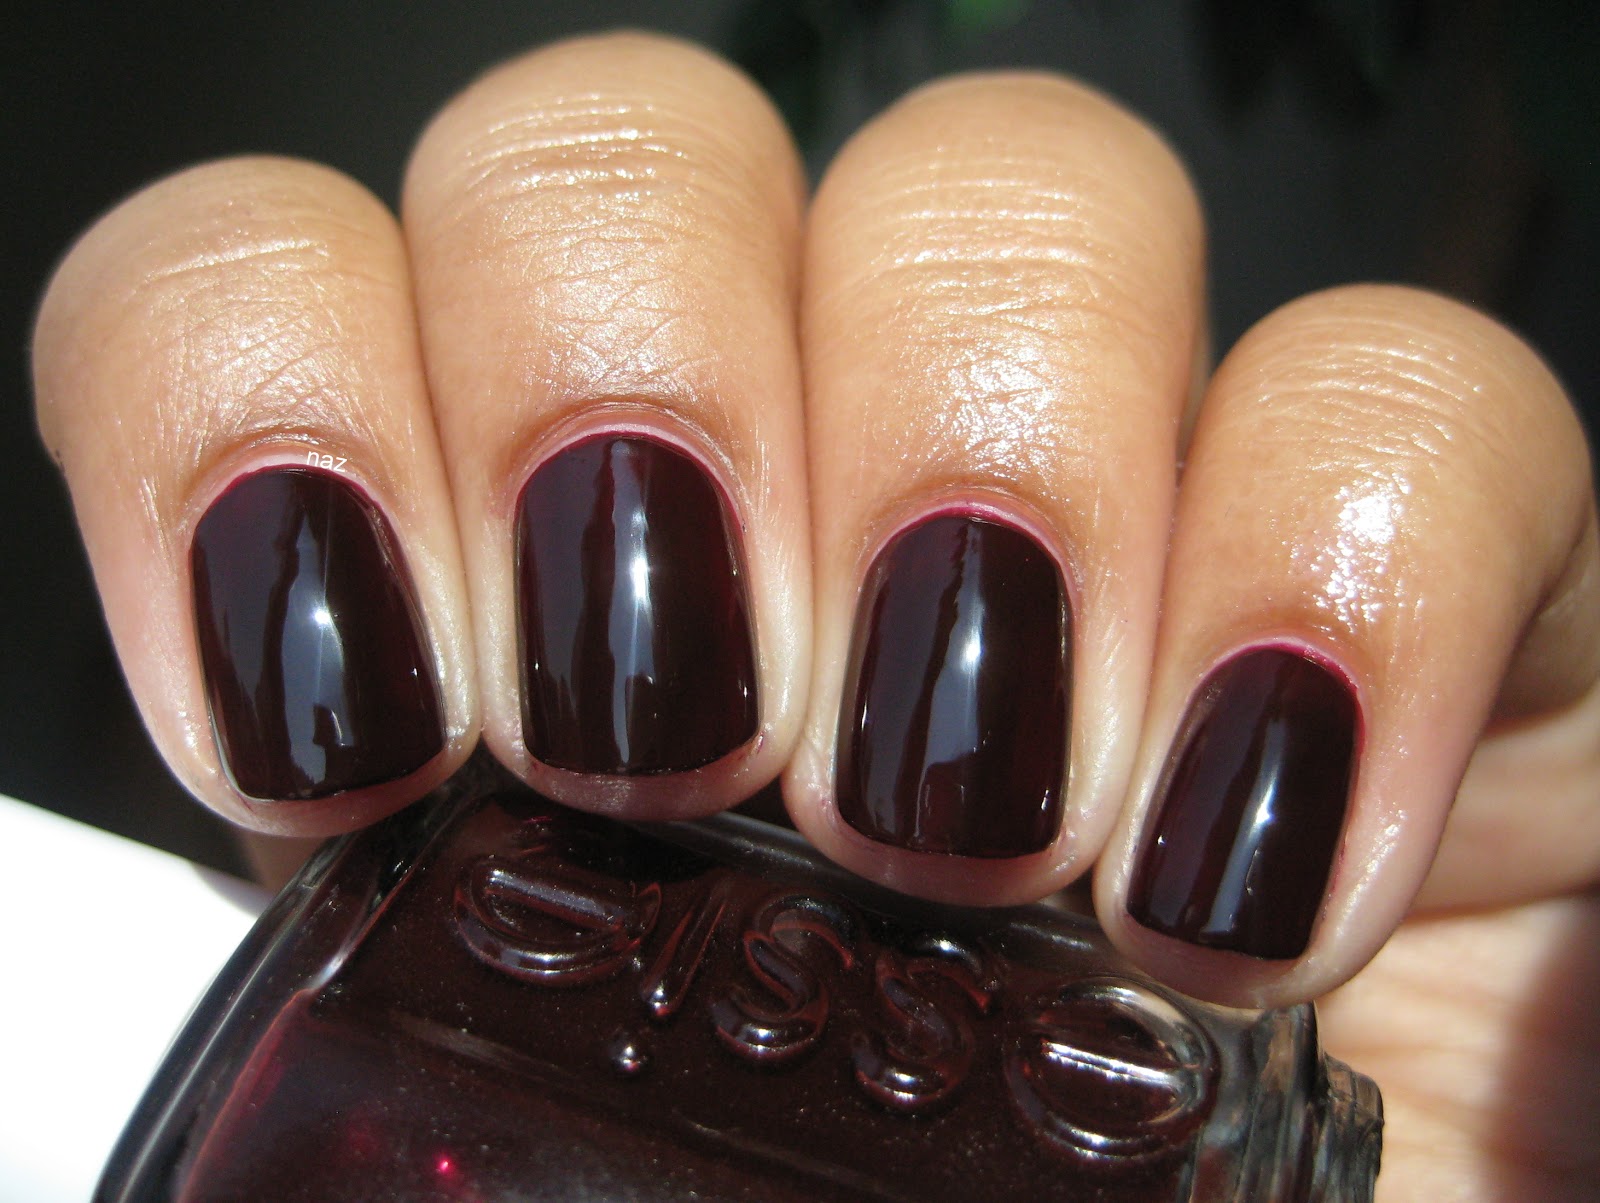 2. Essie Nail Polish in "Wicked" - wide 4